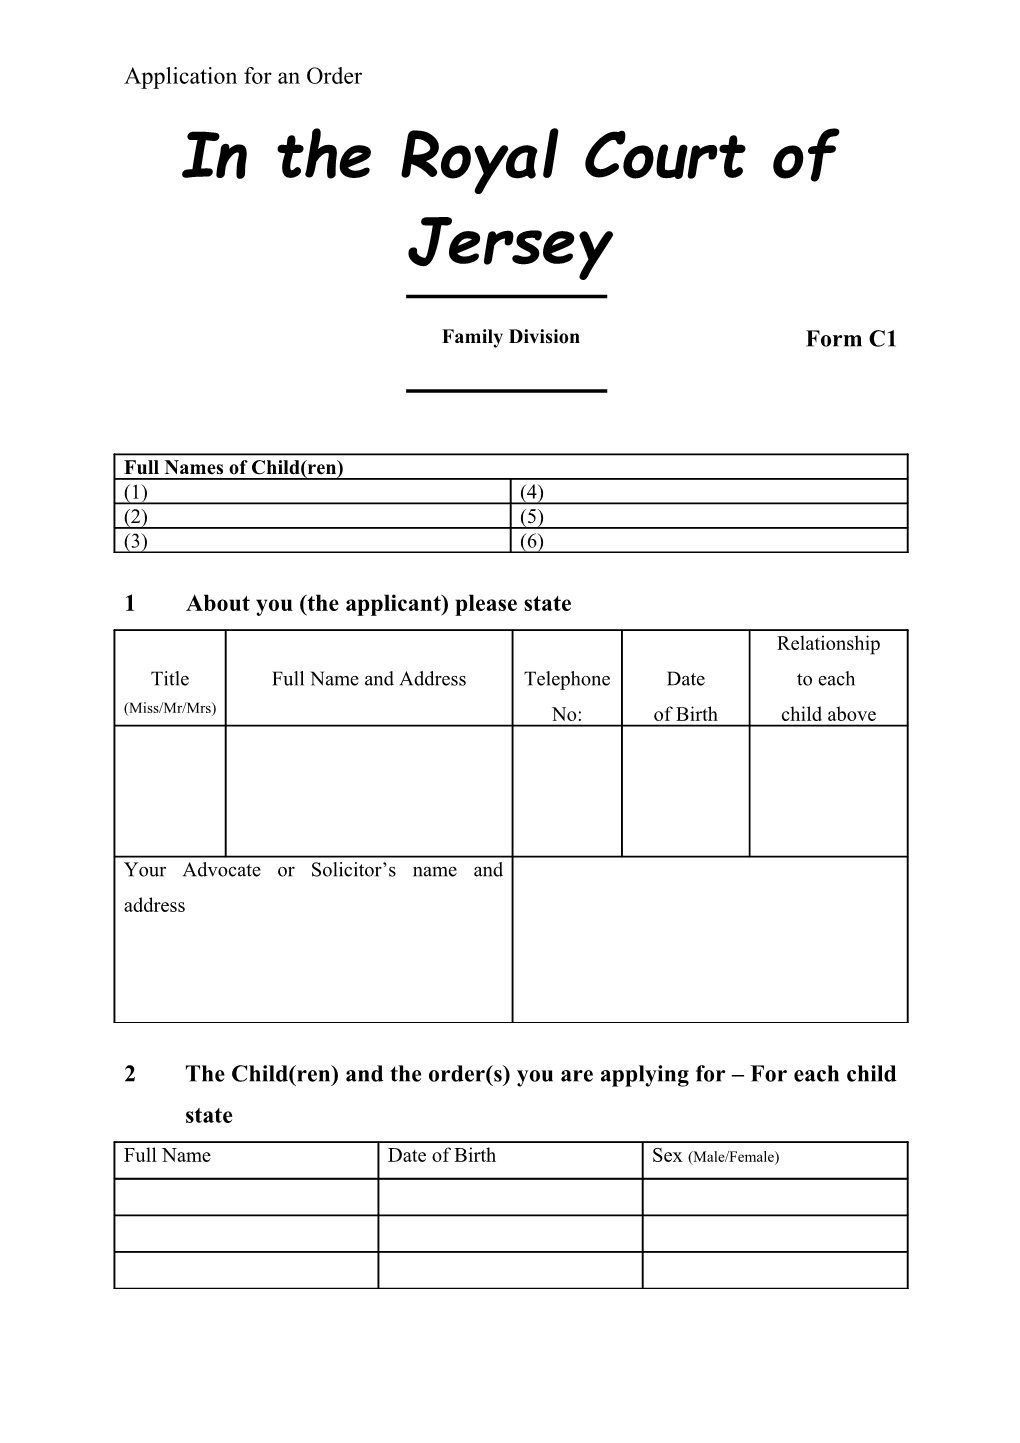 Royal Court of Jersey Family Division Form C1